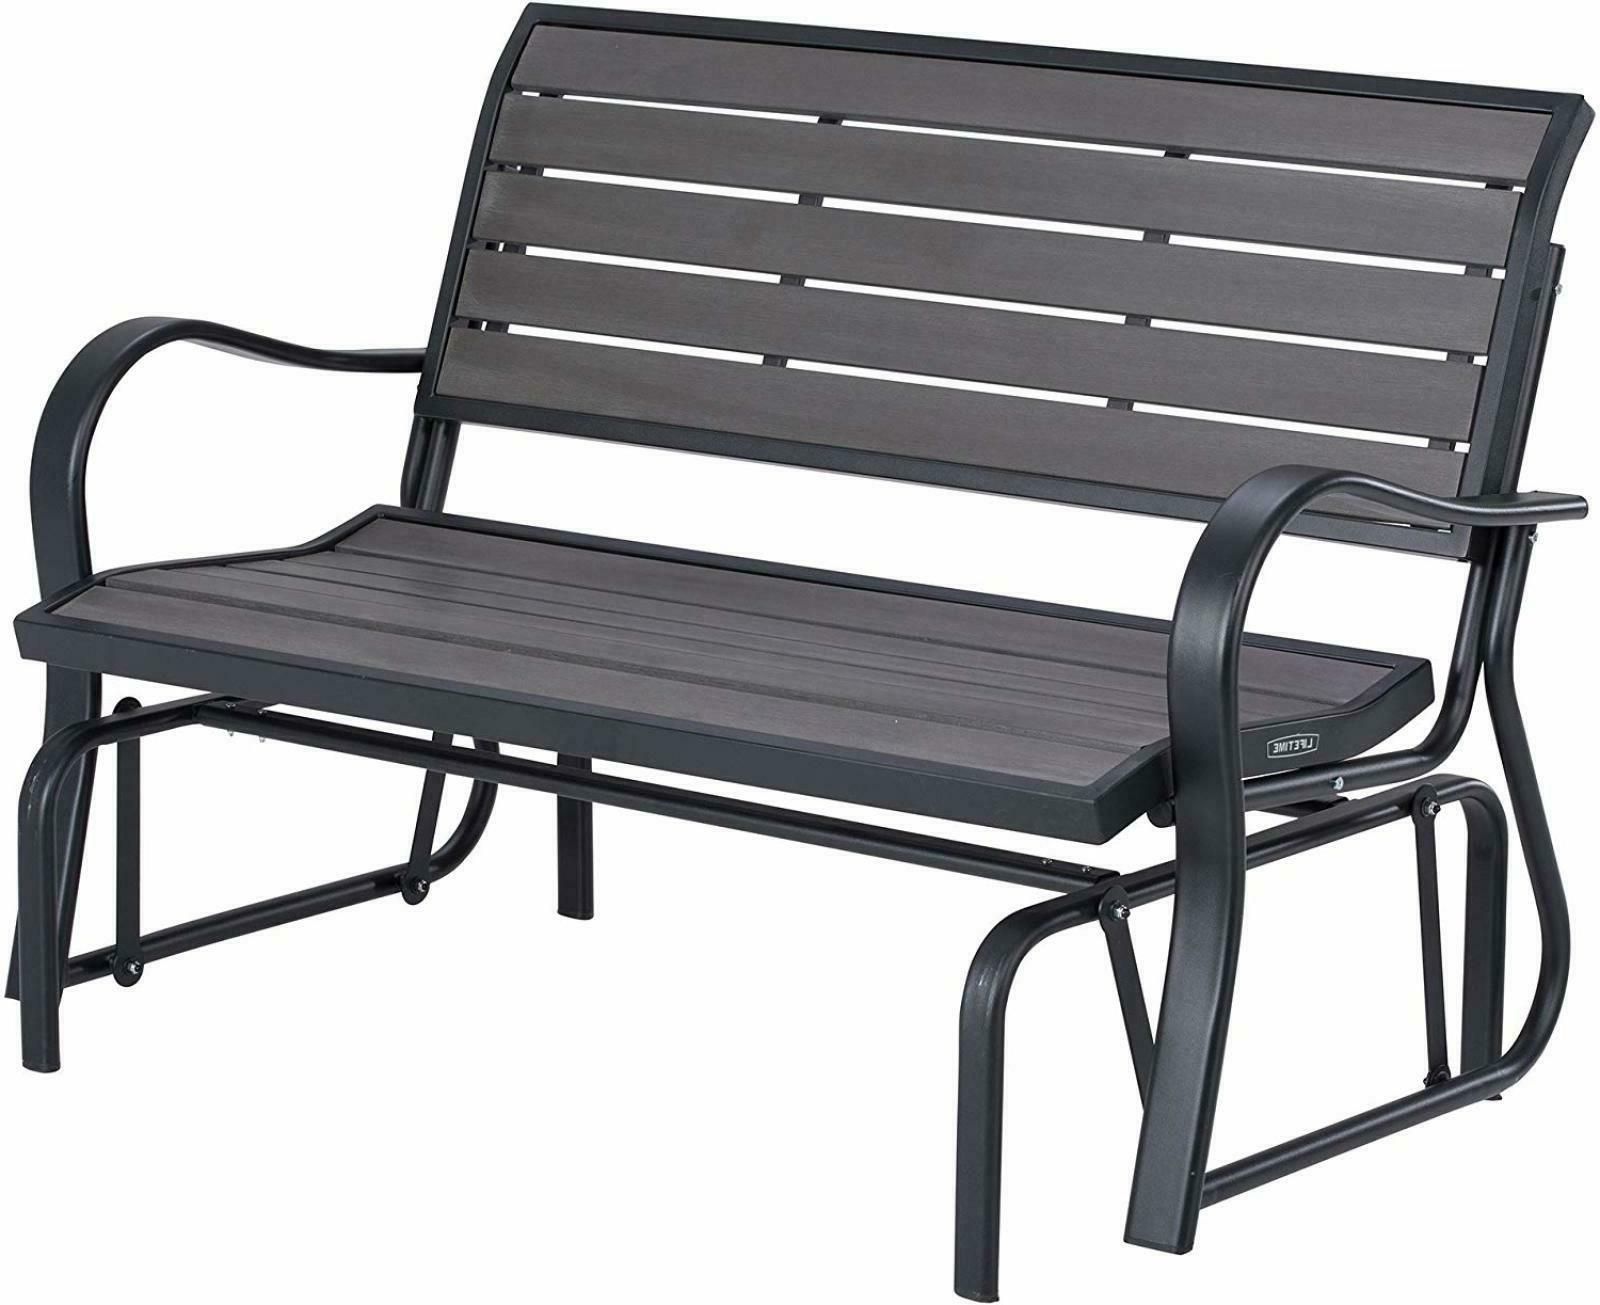 2019 Patio Swing Loveseat Chair 2 People Seats Outdoor Glider Steel Frame Grey  Bench With Regard To 2 Person White Wood Outdoor Swings (View 15 of 25)